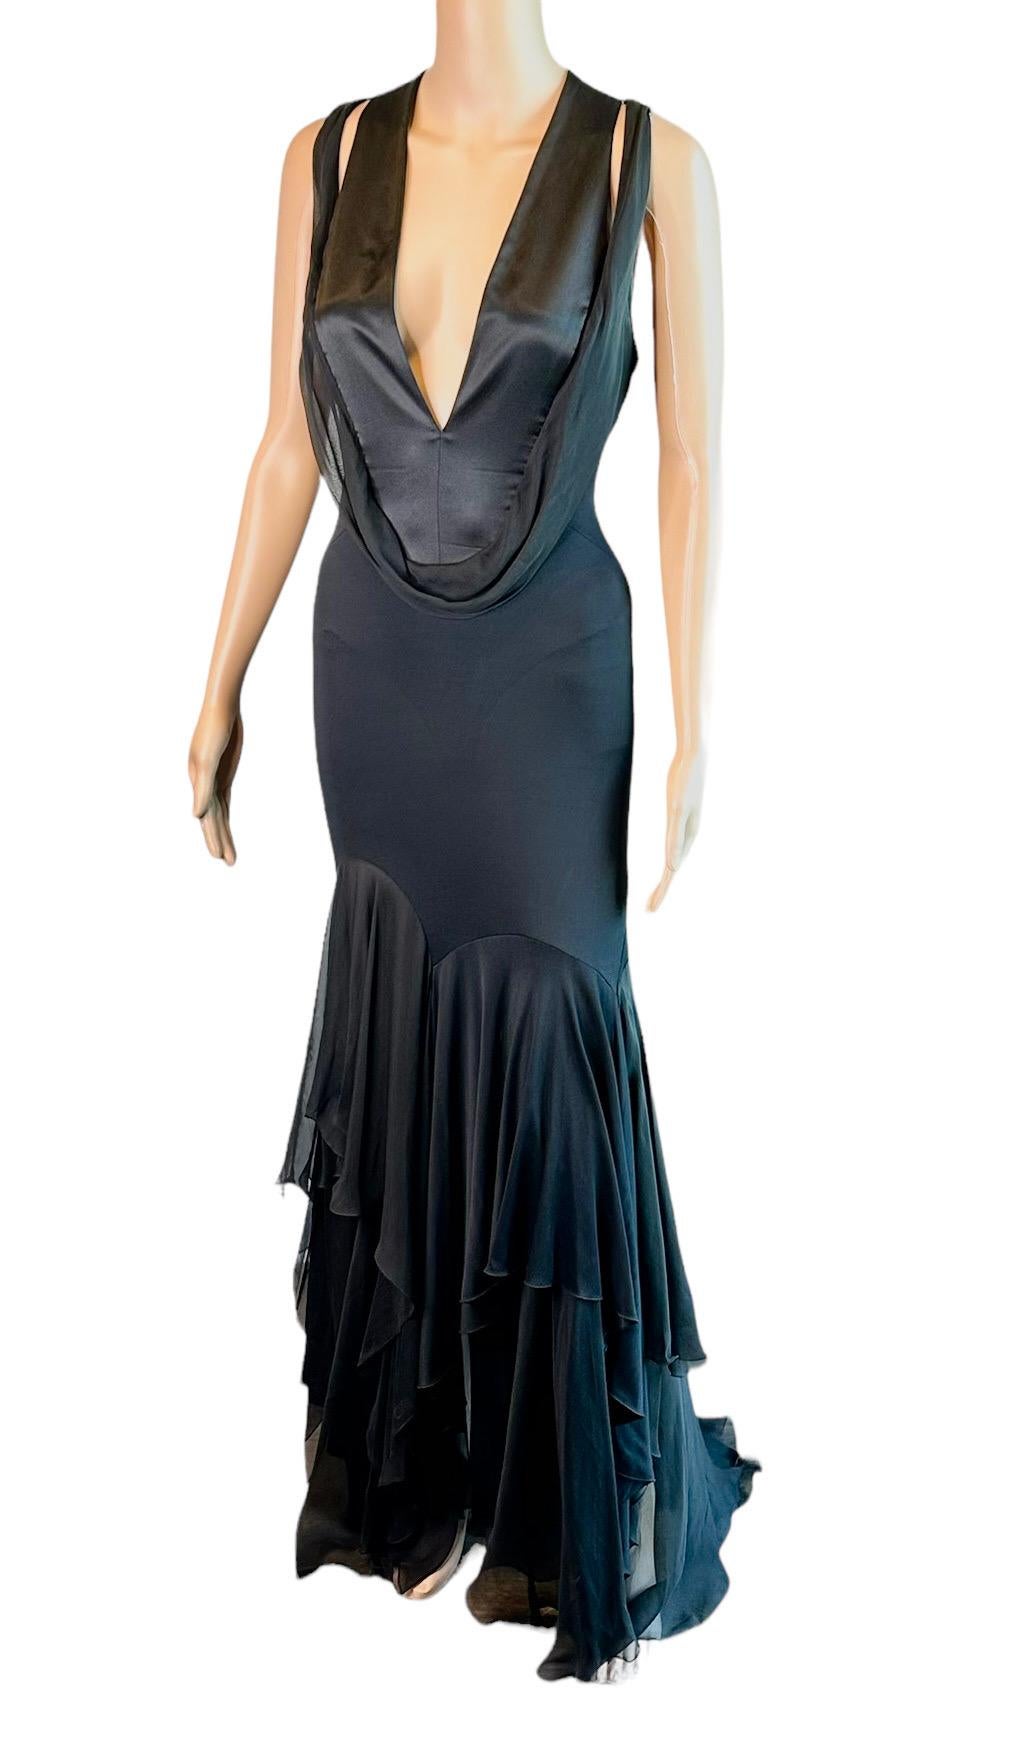 Versace S/S 2004 Plunged Halter Open Back Ruffles Black Evening Dress Gown Size IT 42

Versace black sleeveless maxi dress featuring plunging halter neckline, ruffle accents throughout and concealed zip closure at side.

